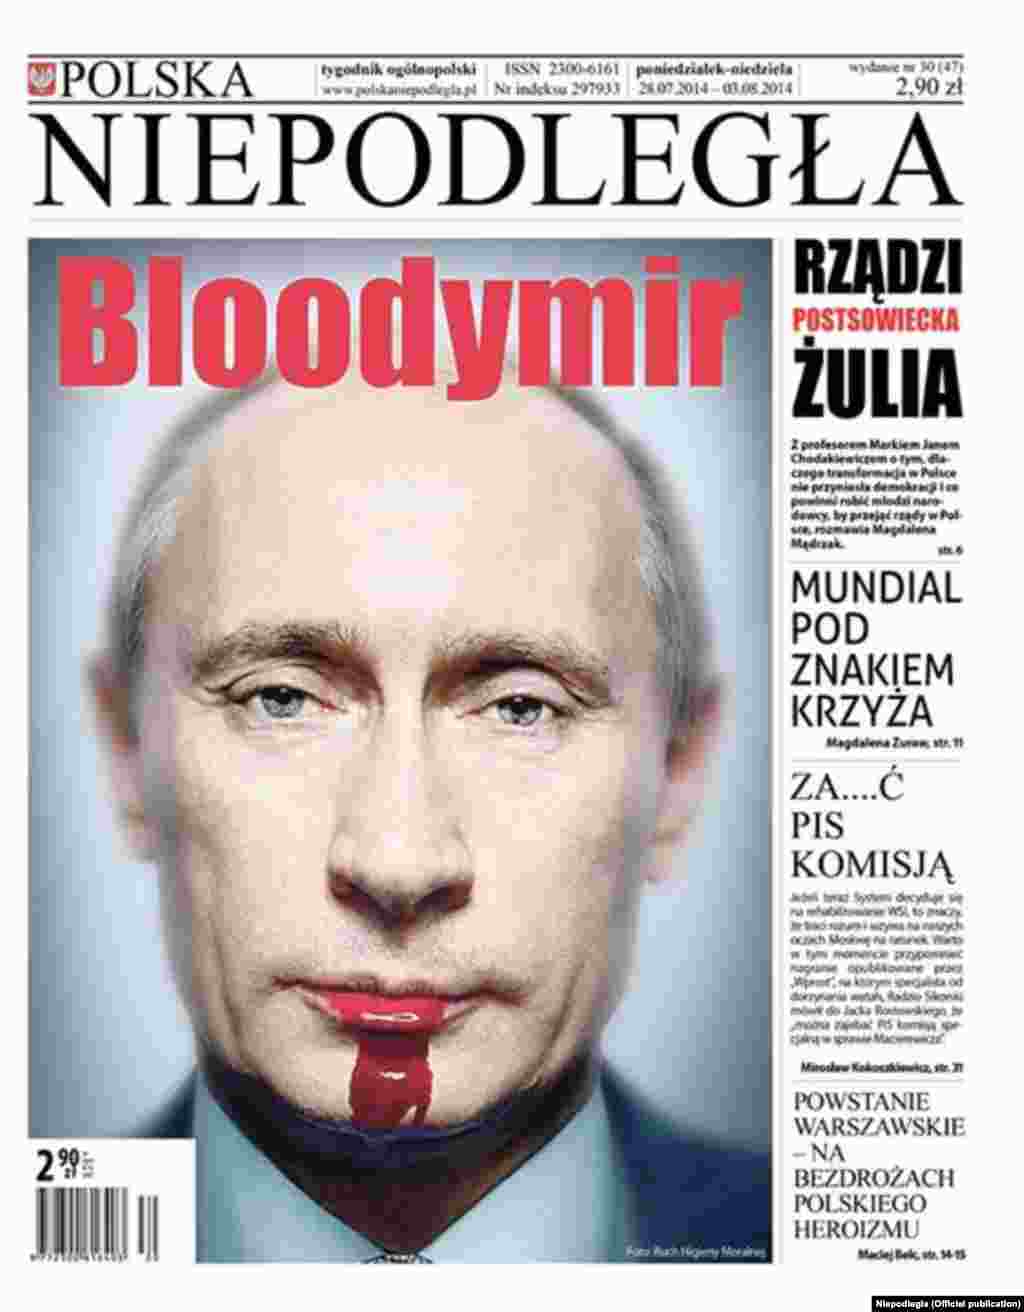 The July 28 issue of&nbsp;Poland&#39;s &quot;Niepodlegla&quot; calls the Russian leader &quot;Bloodymir.&quot;